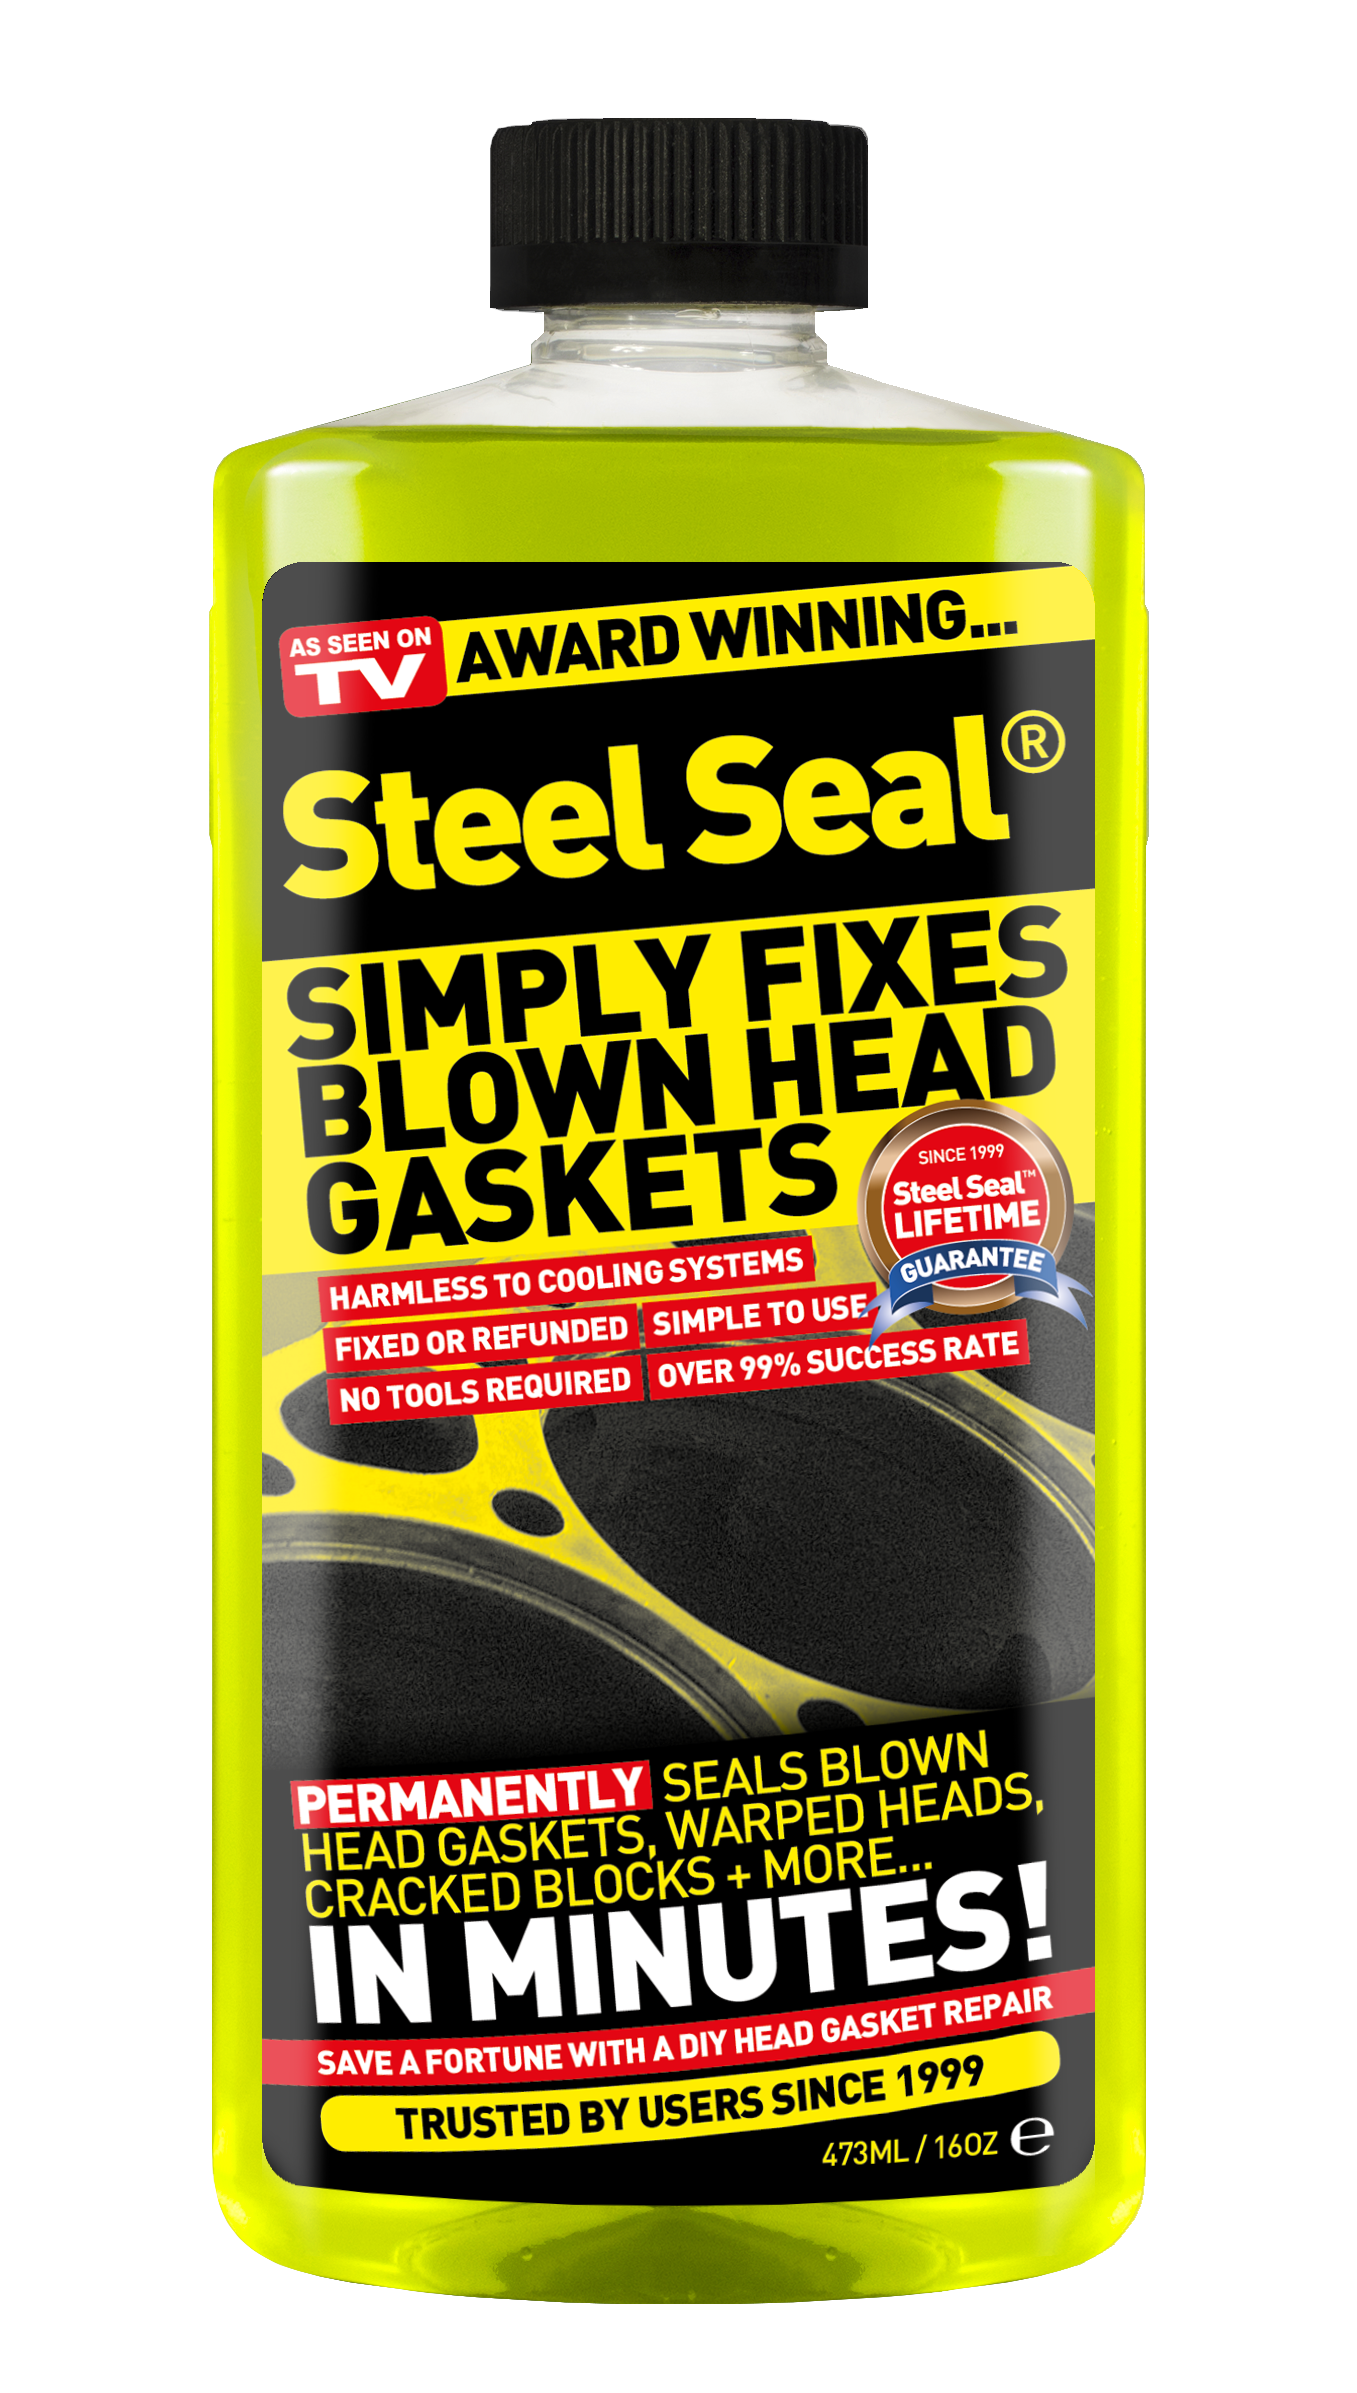 How to Use Steel Seal 